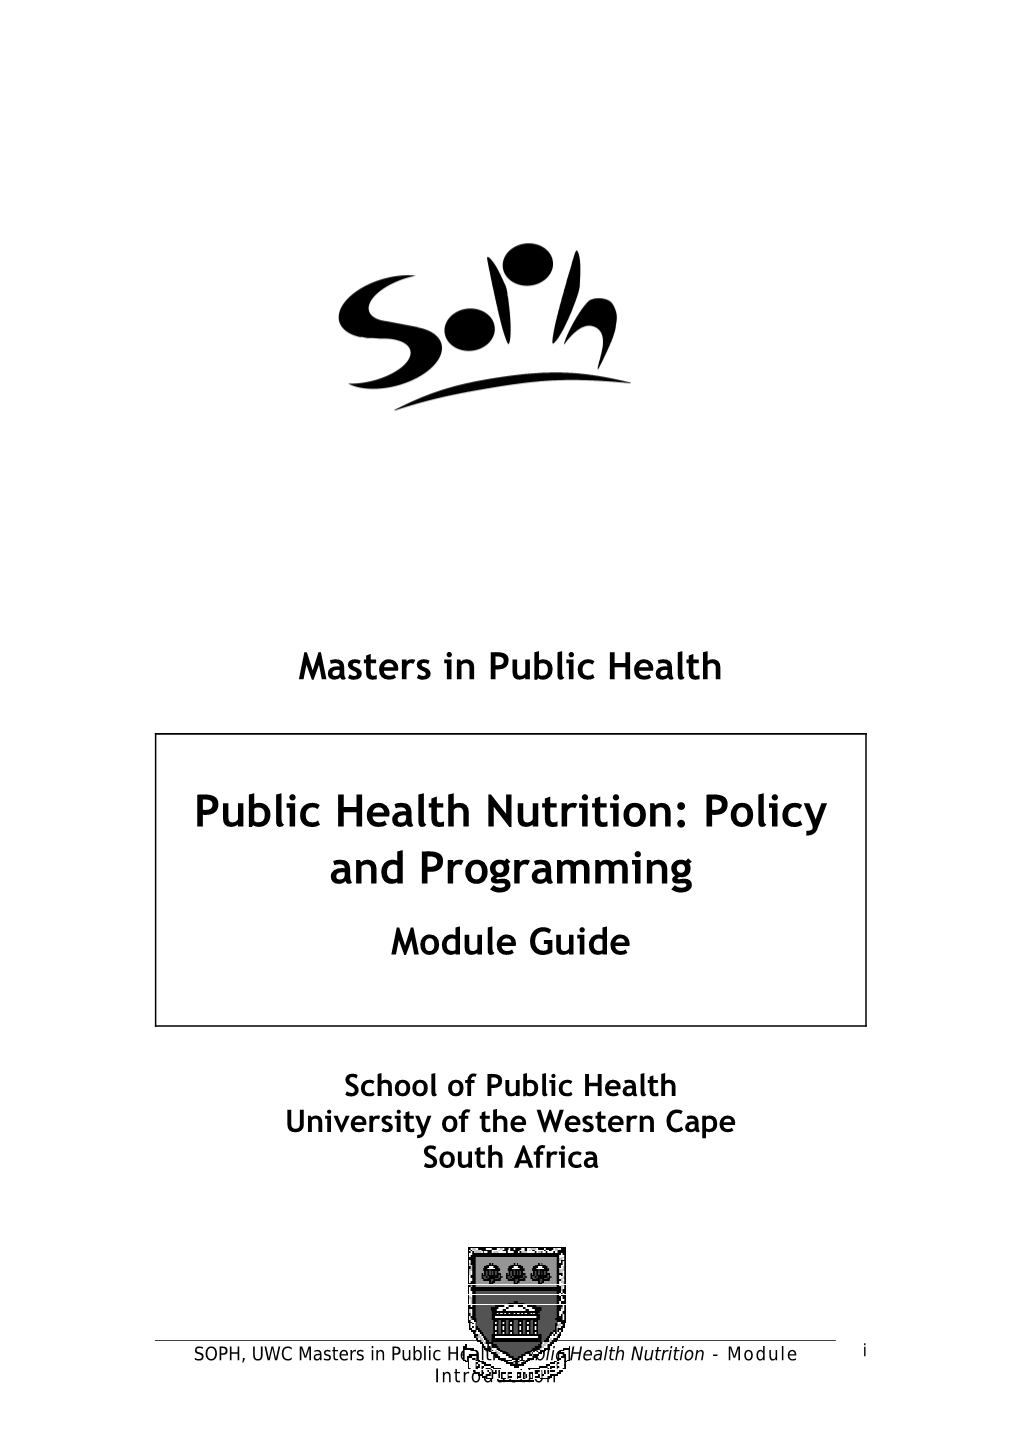 Public Health Nutrition: Policy and Programming